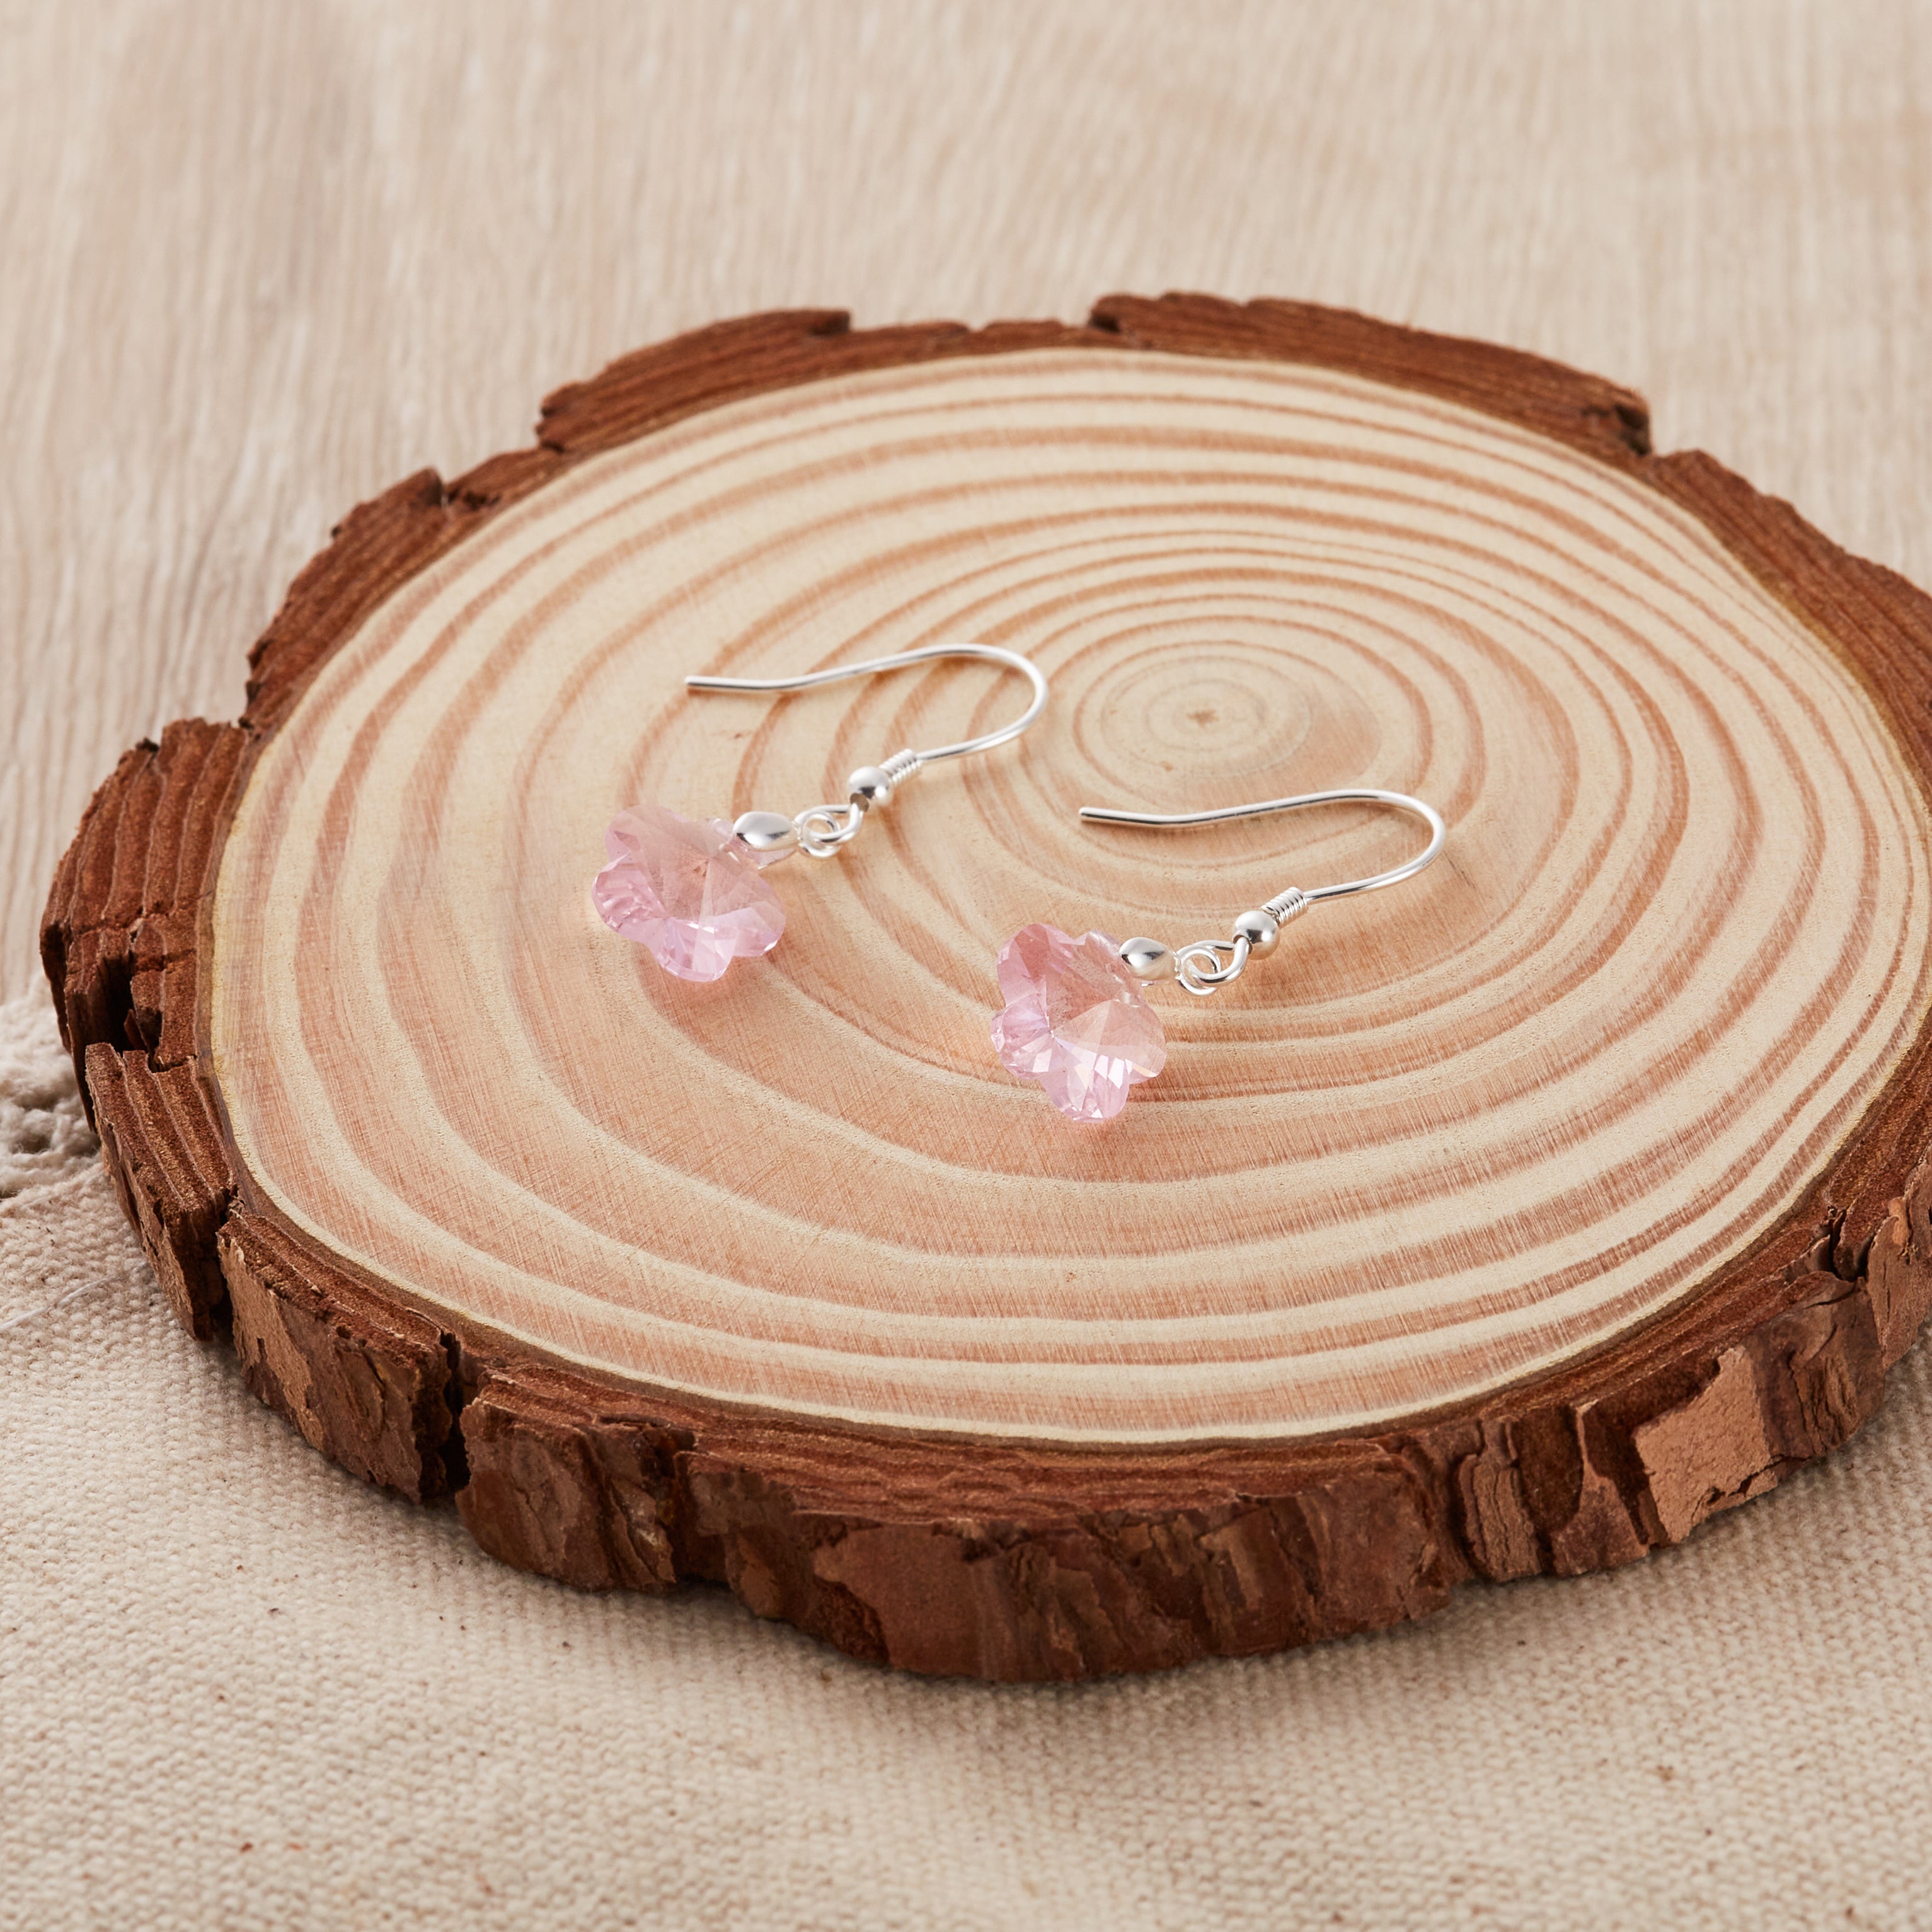 Sterling Silver Light Rose Flower Earrings Created with Zircondia® Crystals